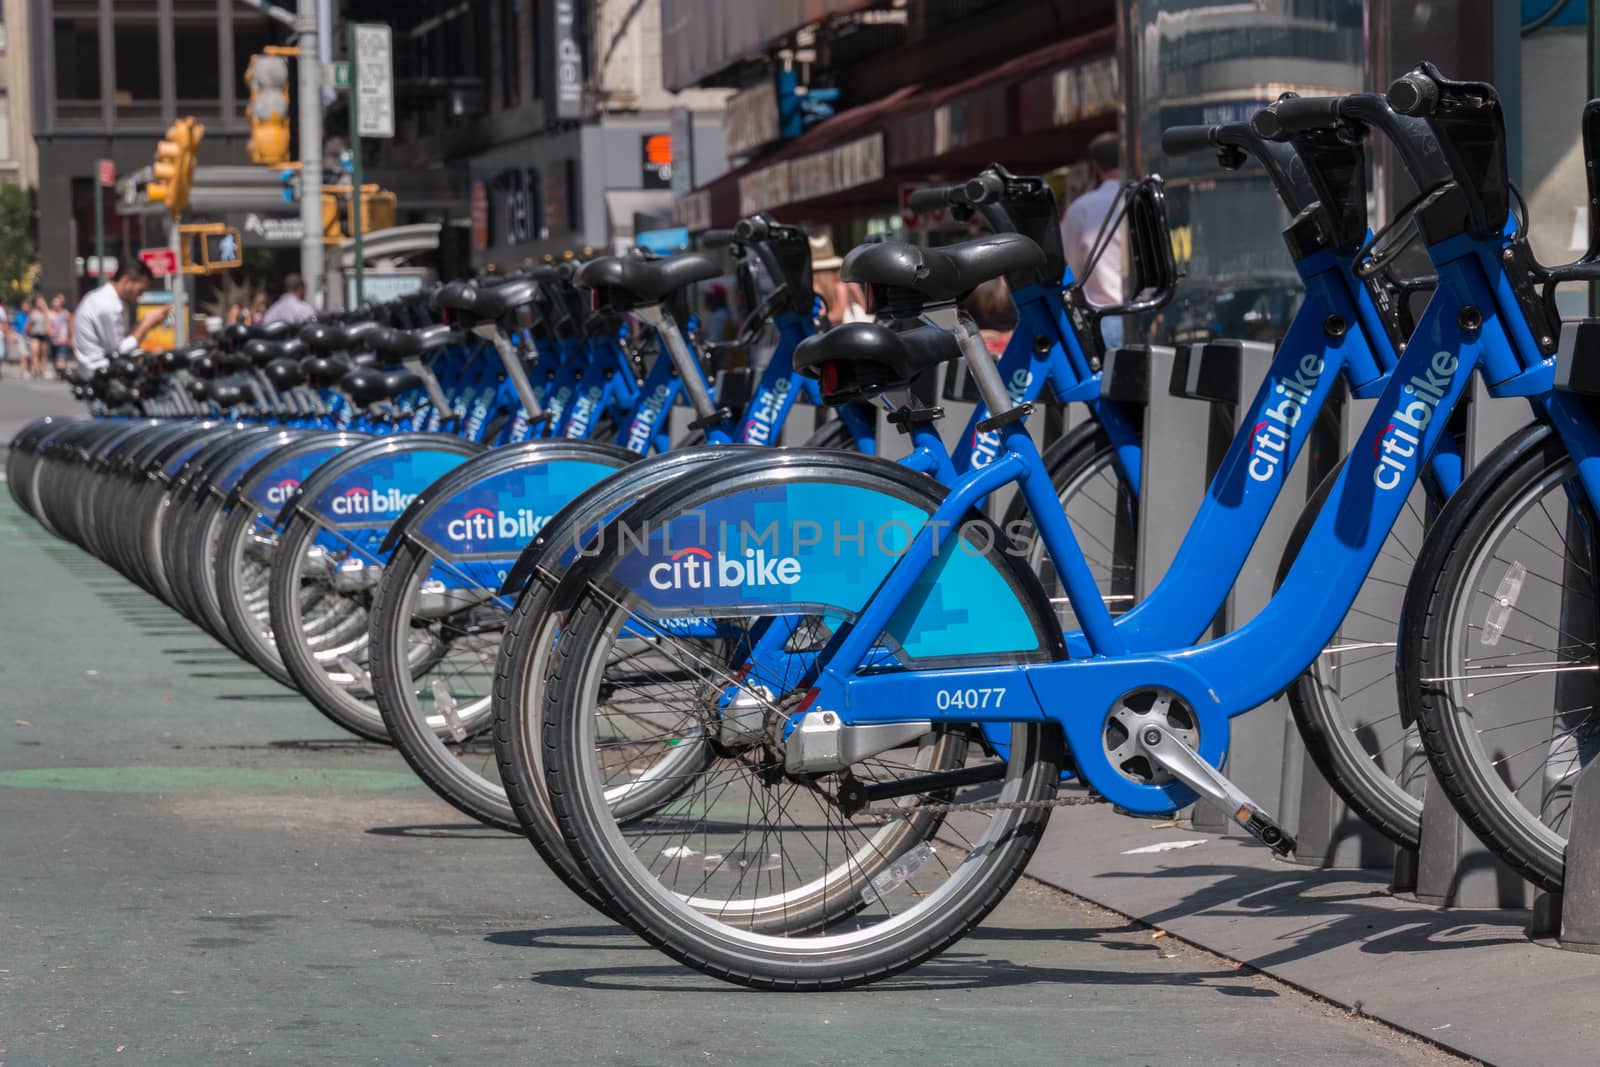 New York - Aug 20: several bicycles from city bike parked in a row waiting to be hired  in downtown New York on August 20, 2014 in New York, USA